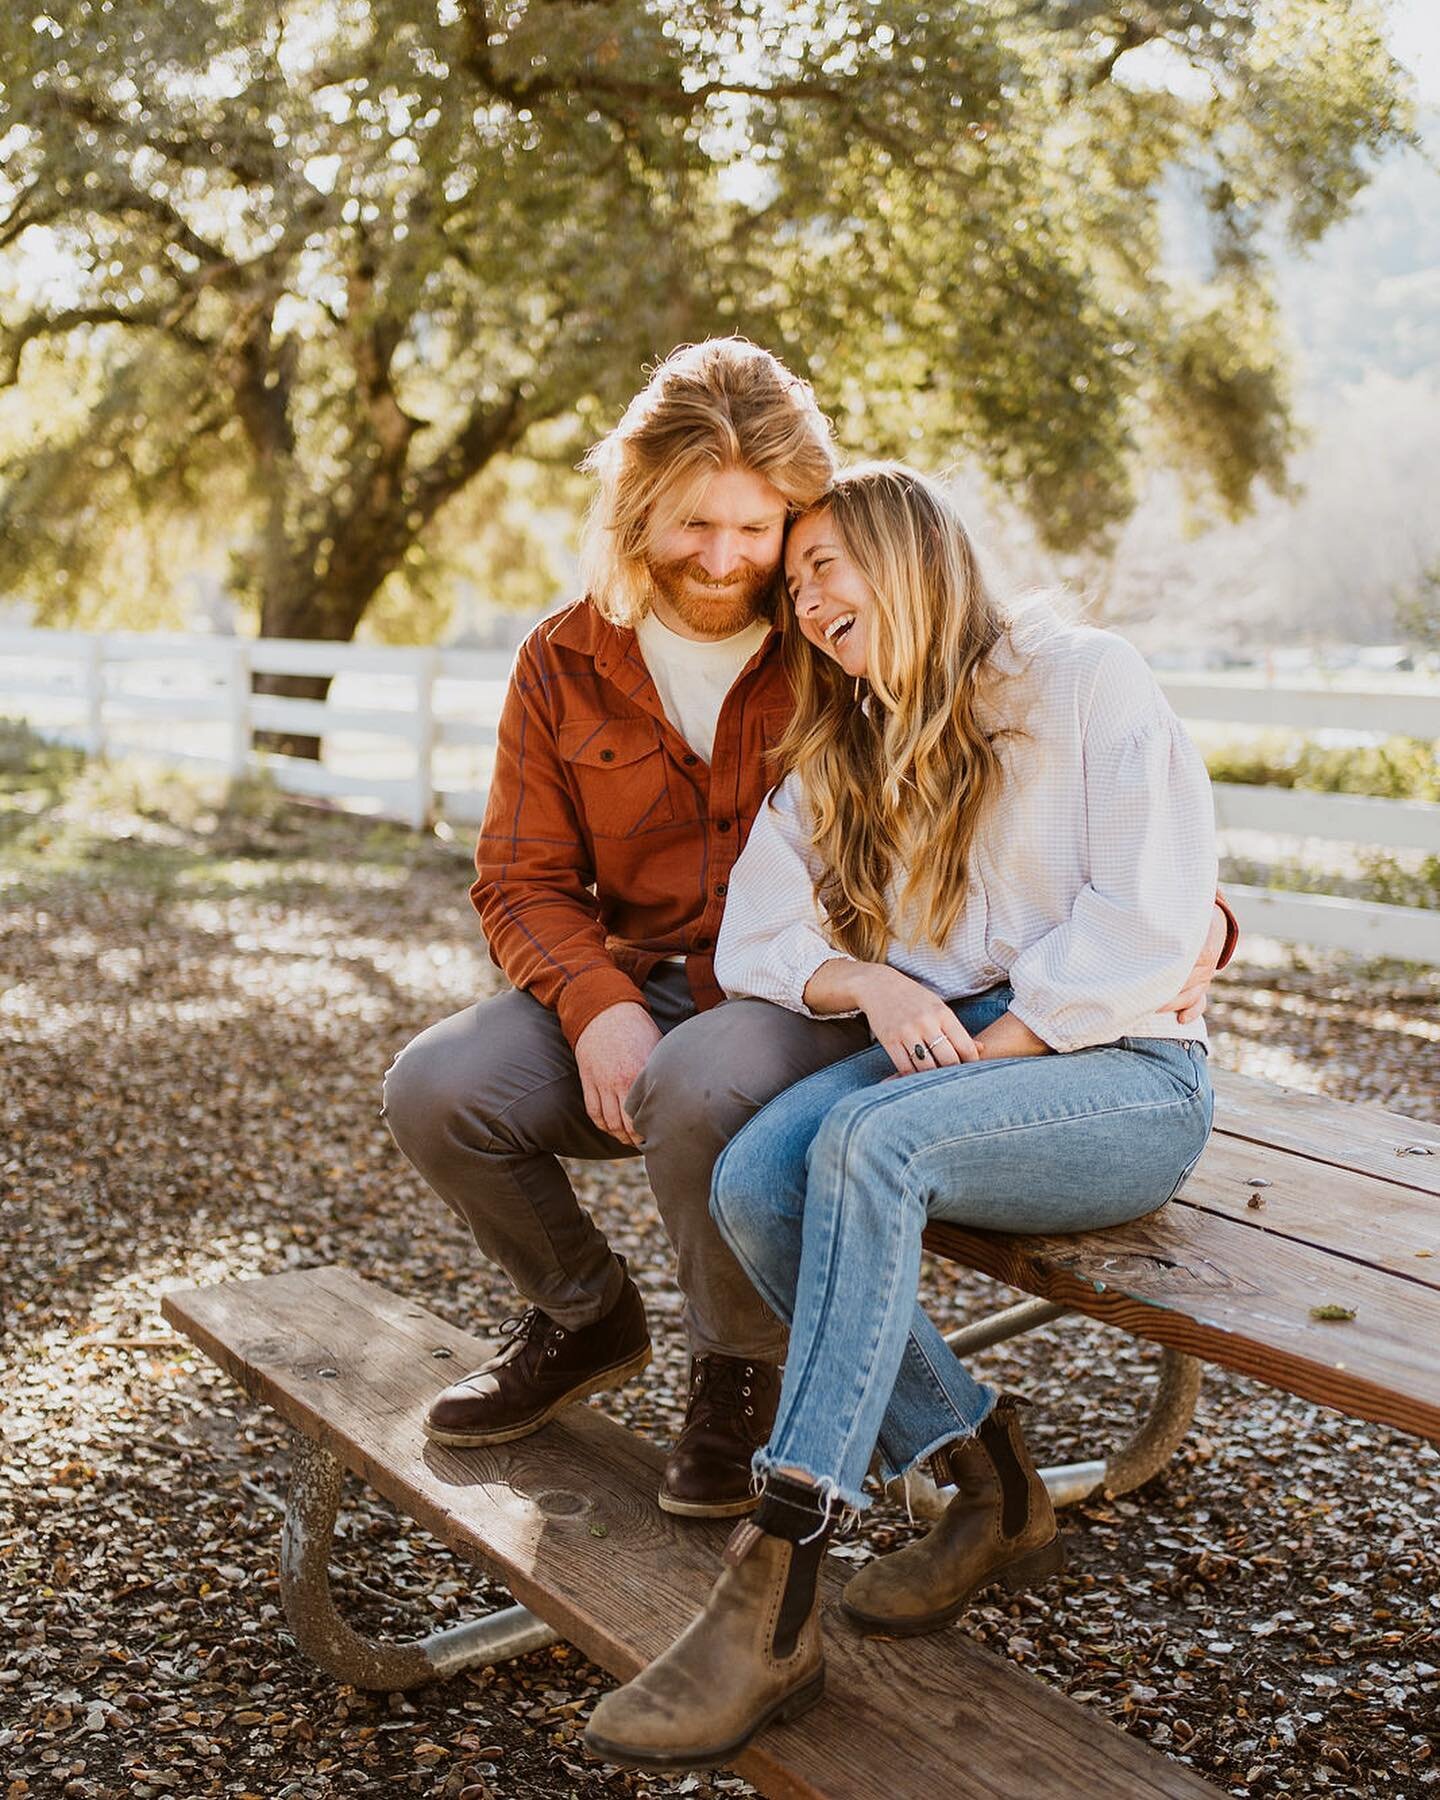 I couldn&rsquo;t stop smiling when I was editing these photos&mdash; their smiles are infectious! Counting down the days till their June wedding 🕊️
.
.
#sacramentophotographer #santacruzphotographer #bayareaphotographer